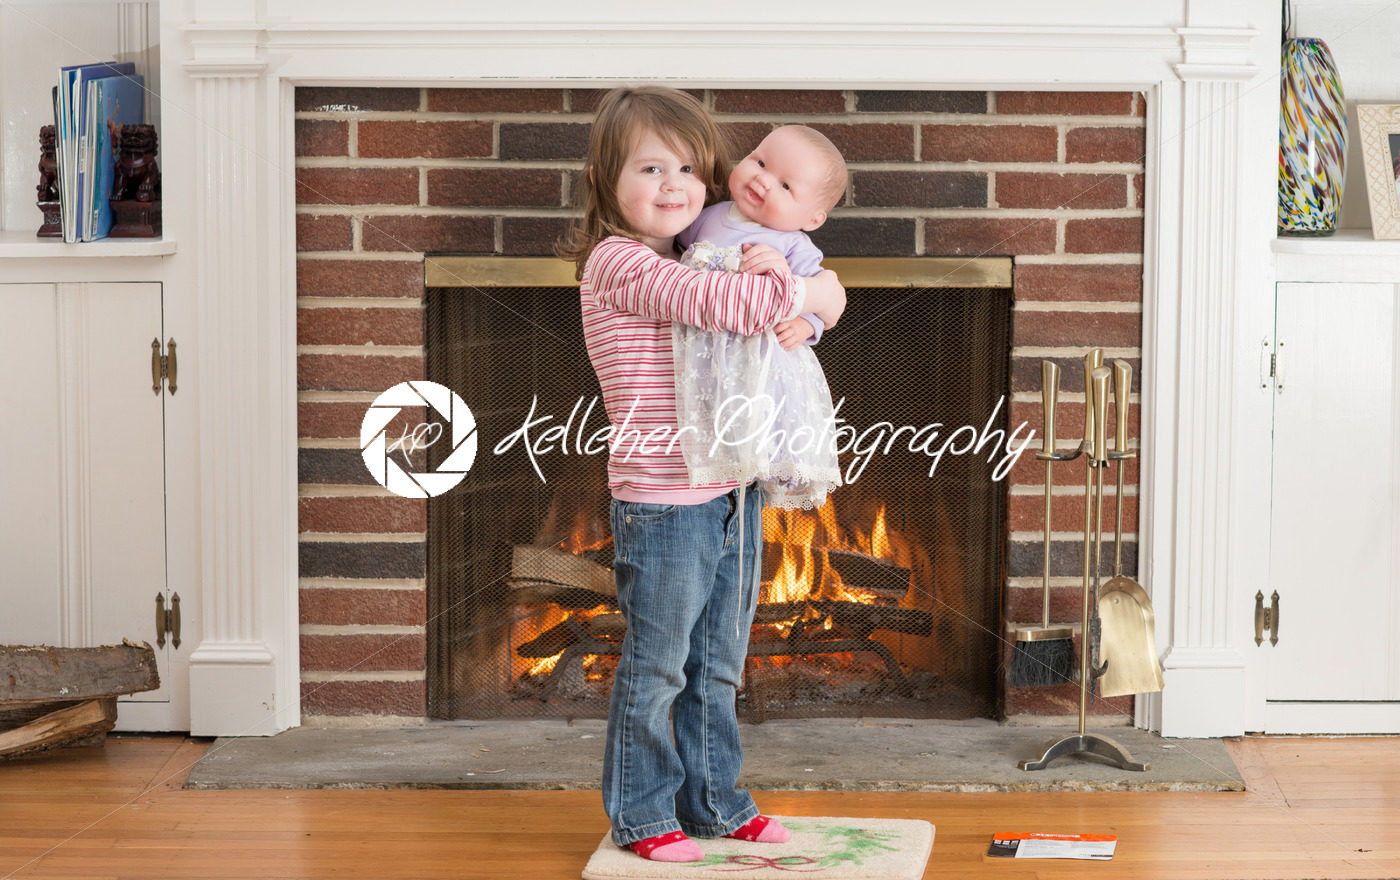 Portrait of a young smiling girl hold a baby doll in front of a fireplace dressed for valentine’s day - Kelleher Photography Store